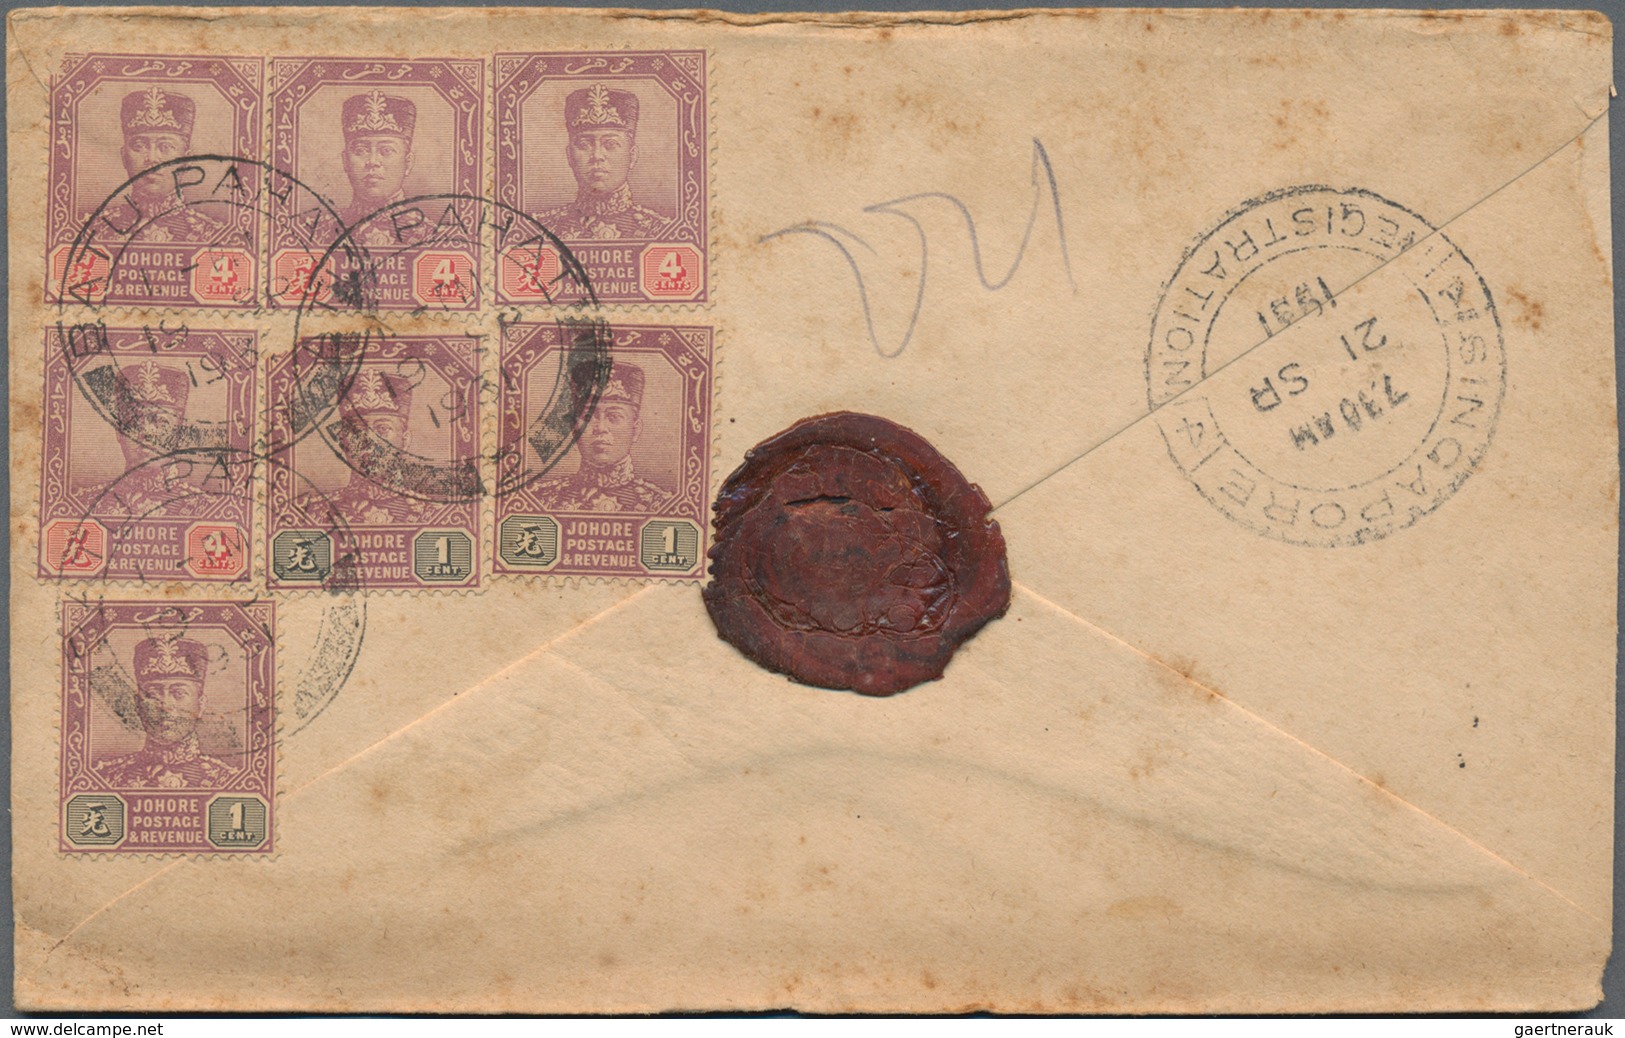 Malaiische Staaten - Johor: 1900's-1960 Ca.: More Than 900 Covers From Various Post Offices In Johor - Johore